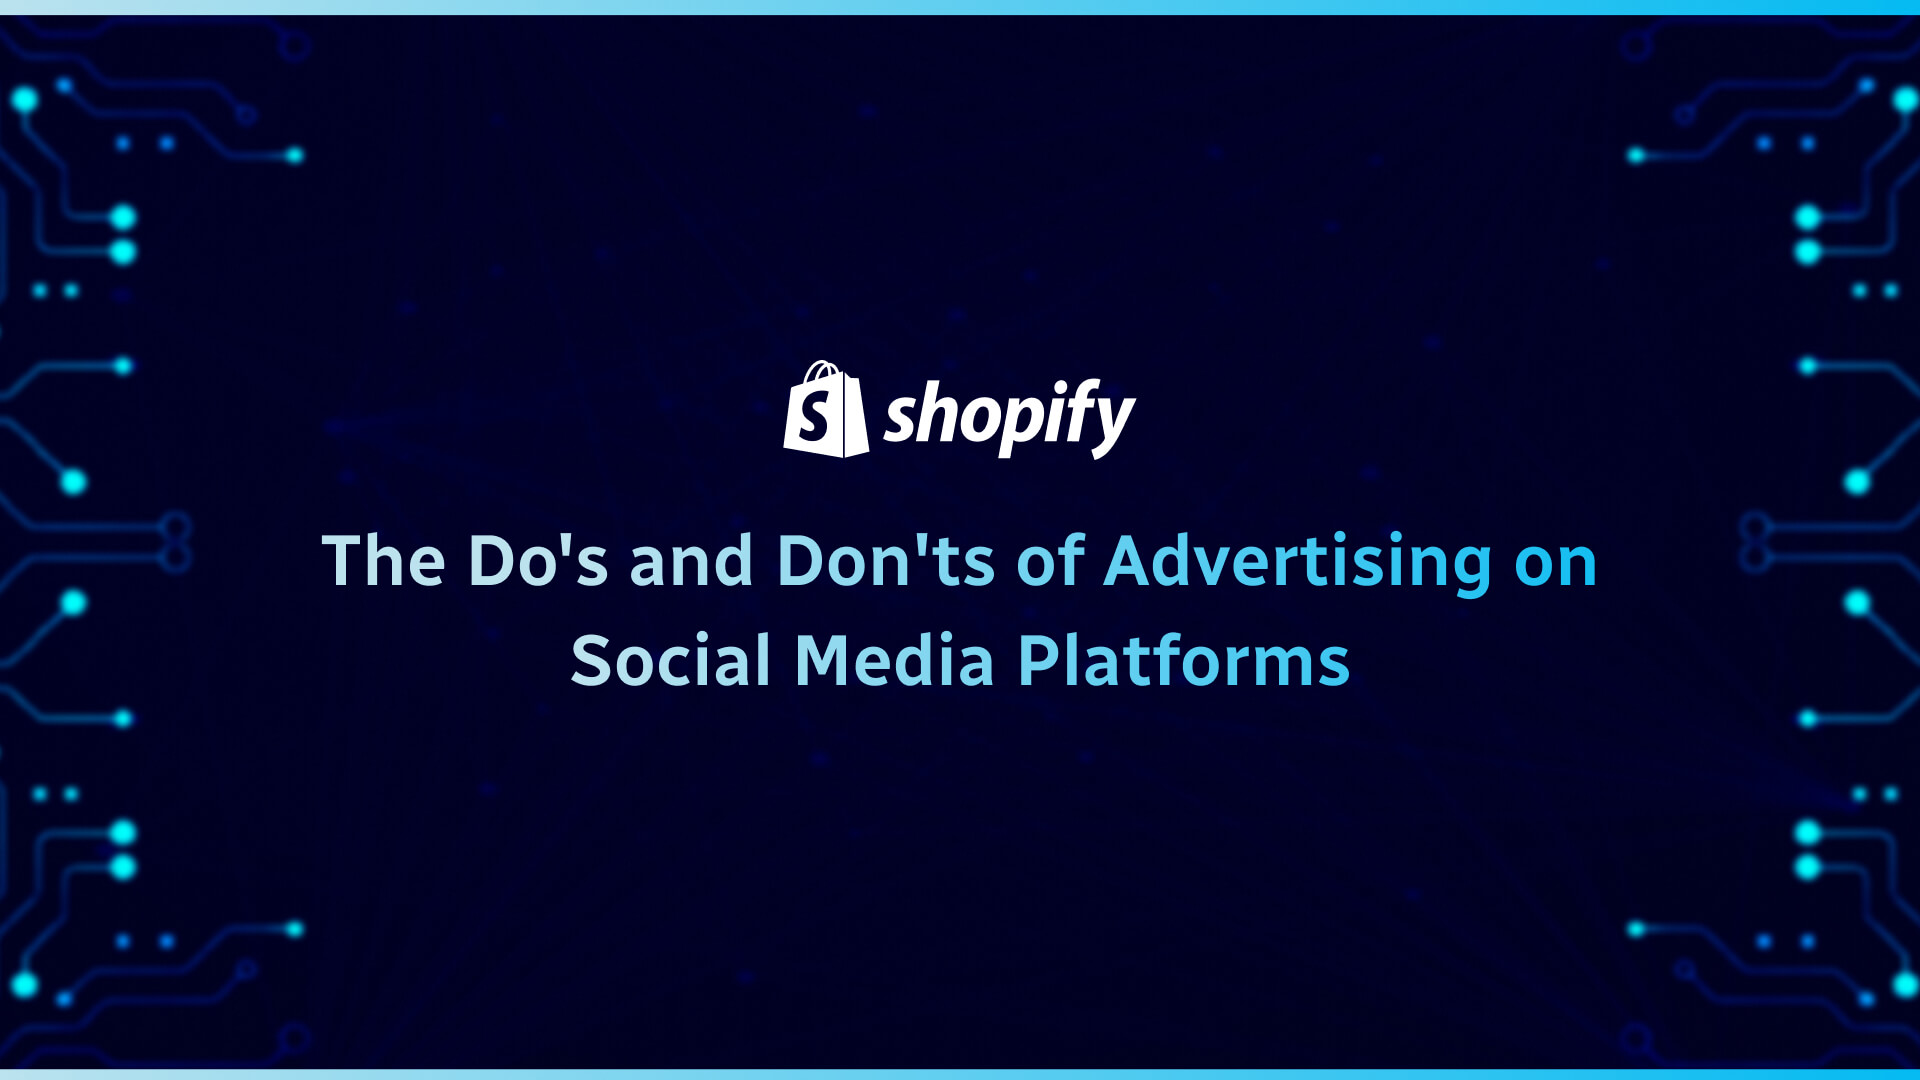 The Do's and Don'ts of Advertising on Social Media Platforms